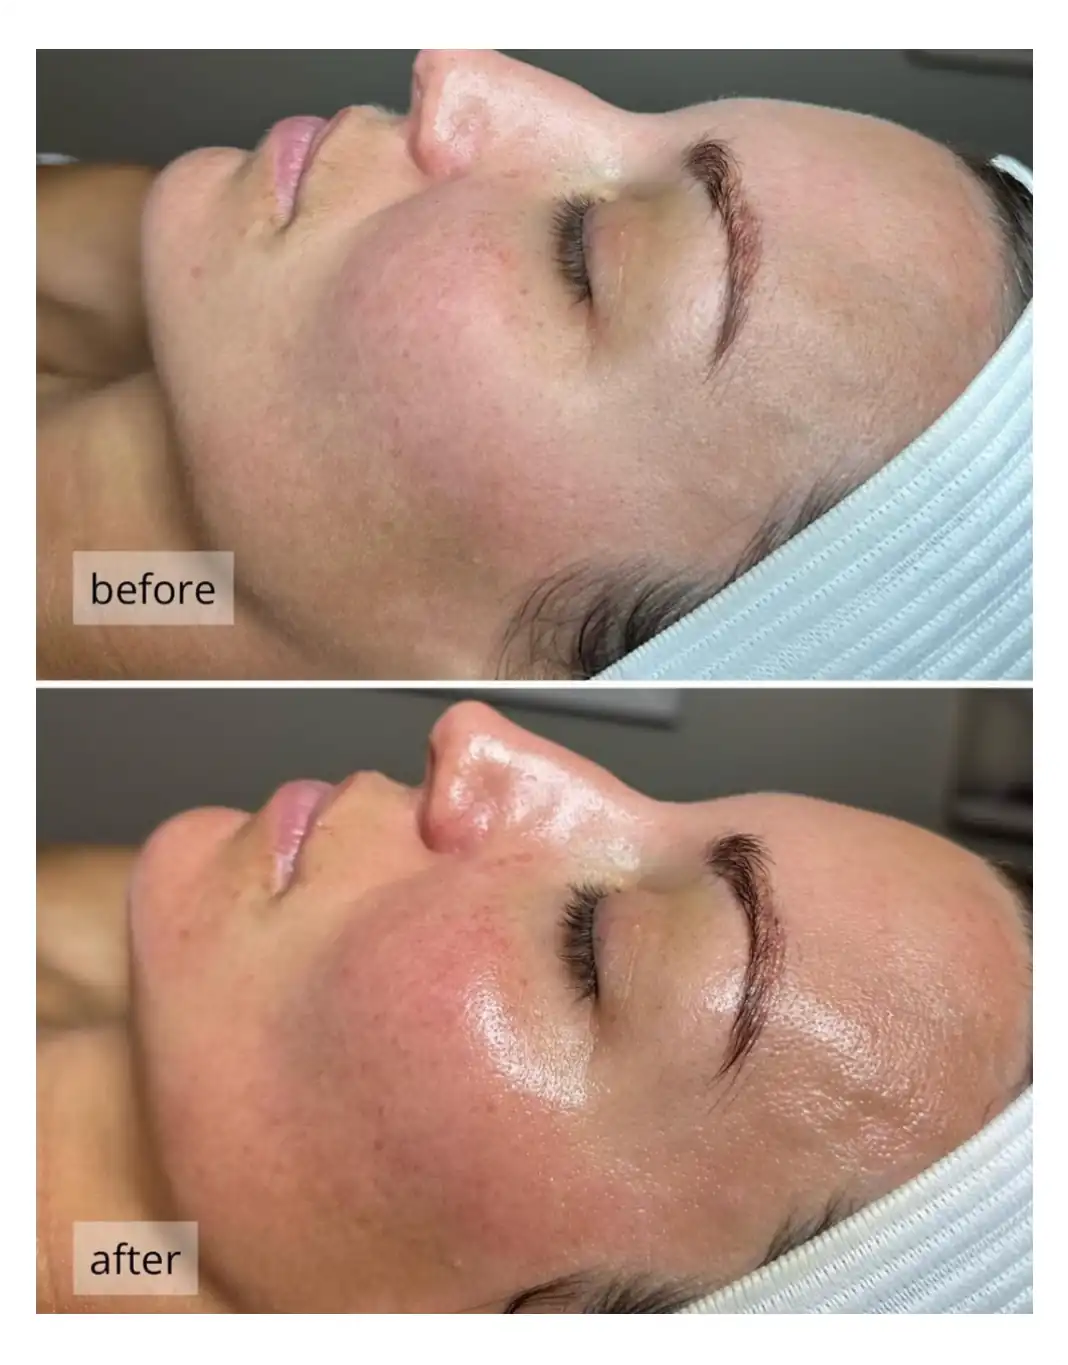 before and after image of DiamondGlow treatment